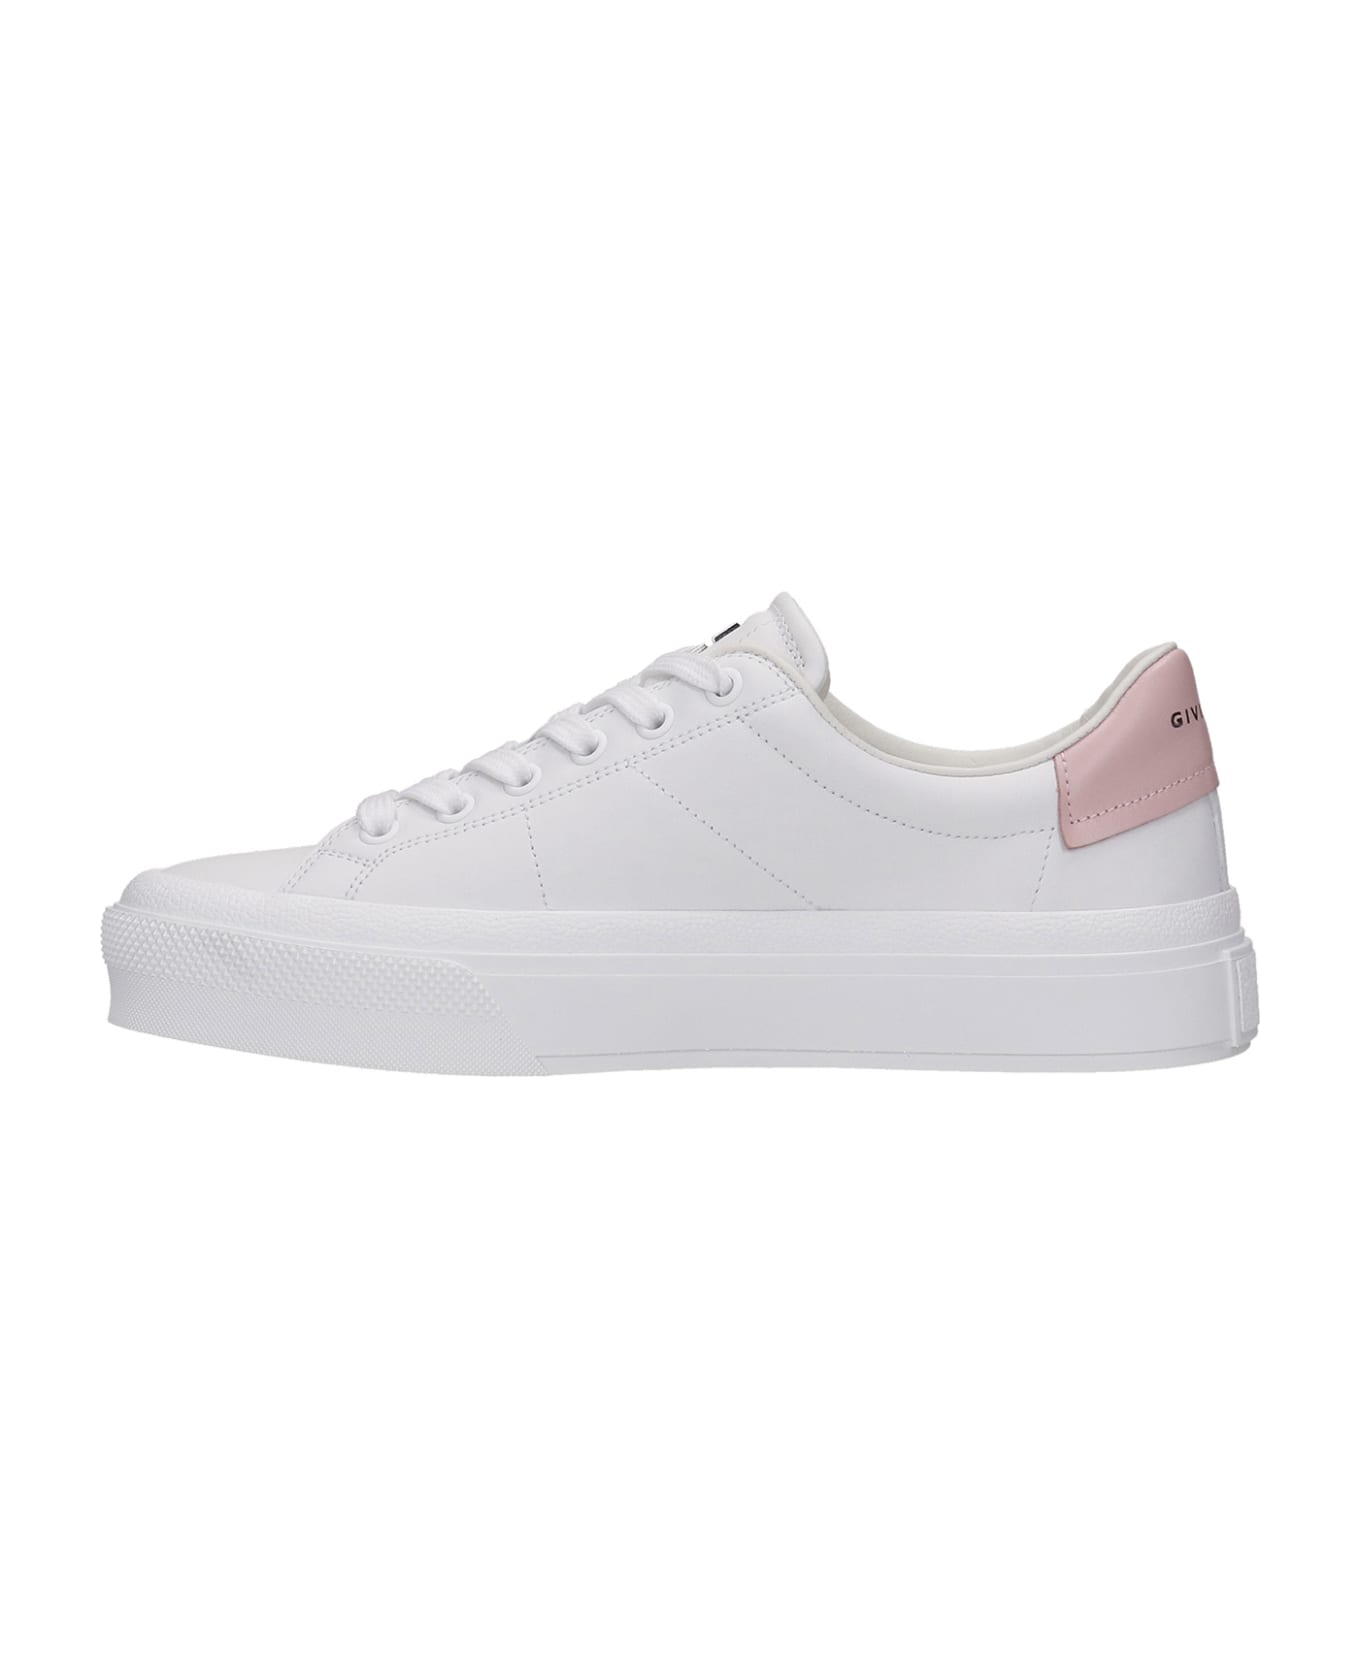 Givenchy Sneakers In White Leather - BIANCO